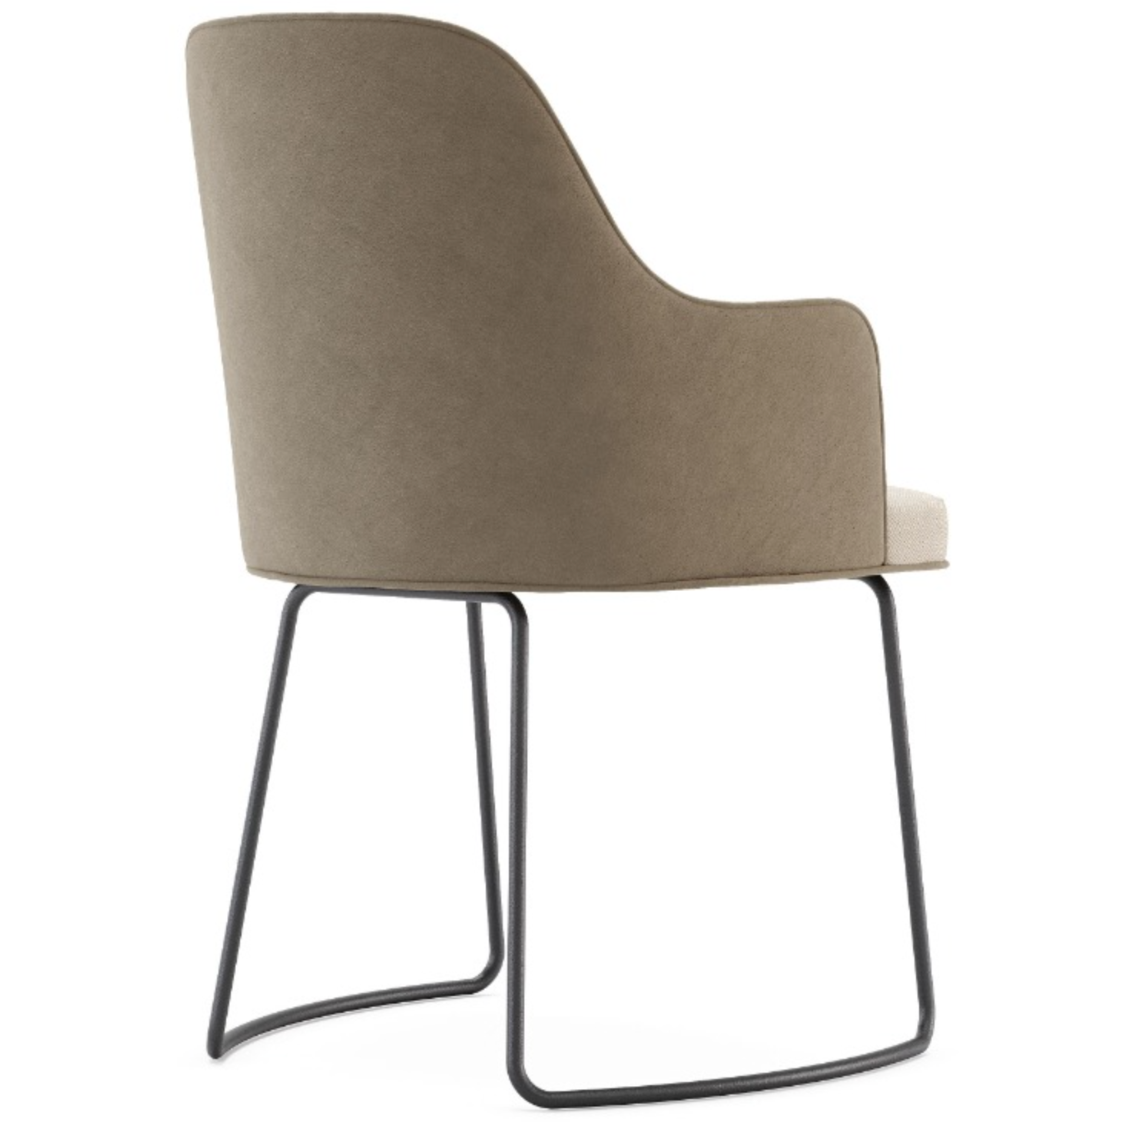 Domkapa Anna Chair with Armrests & Metal Sled Baseboard - A Pair - Customisable | Modern Furniture + Decor